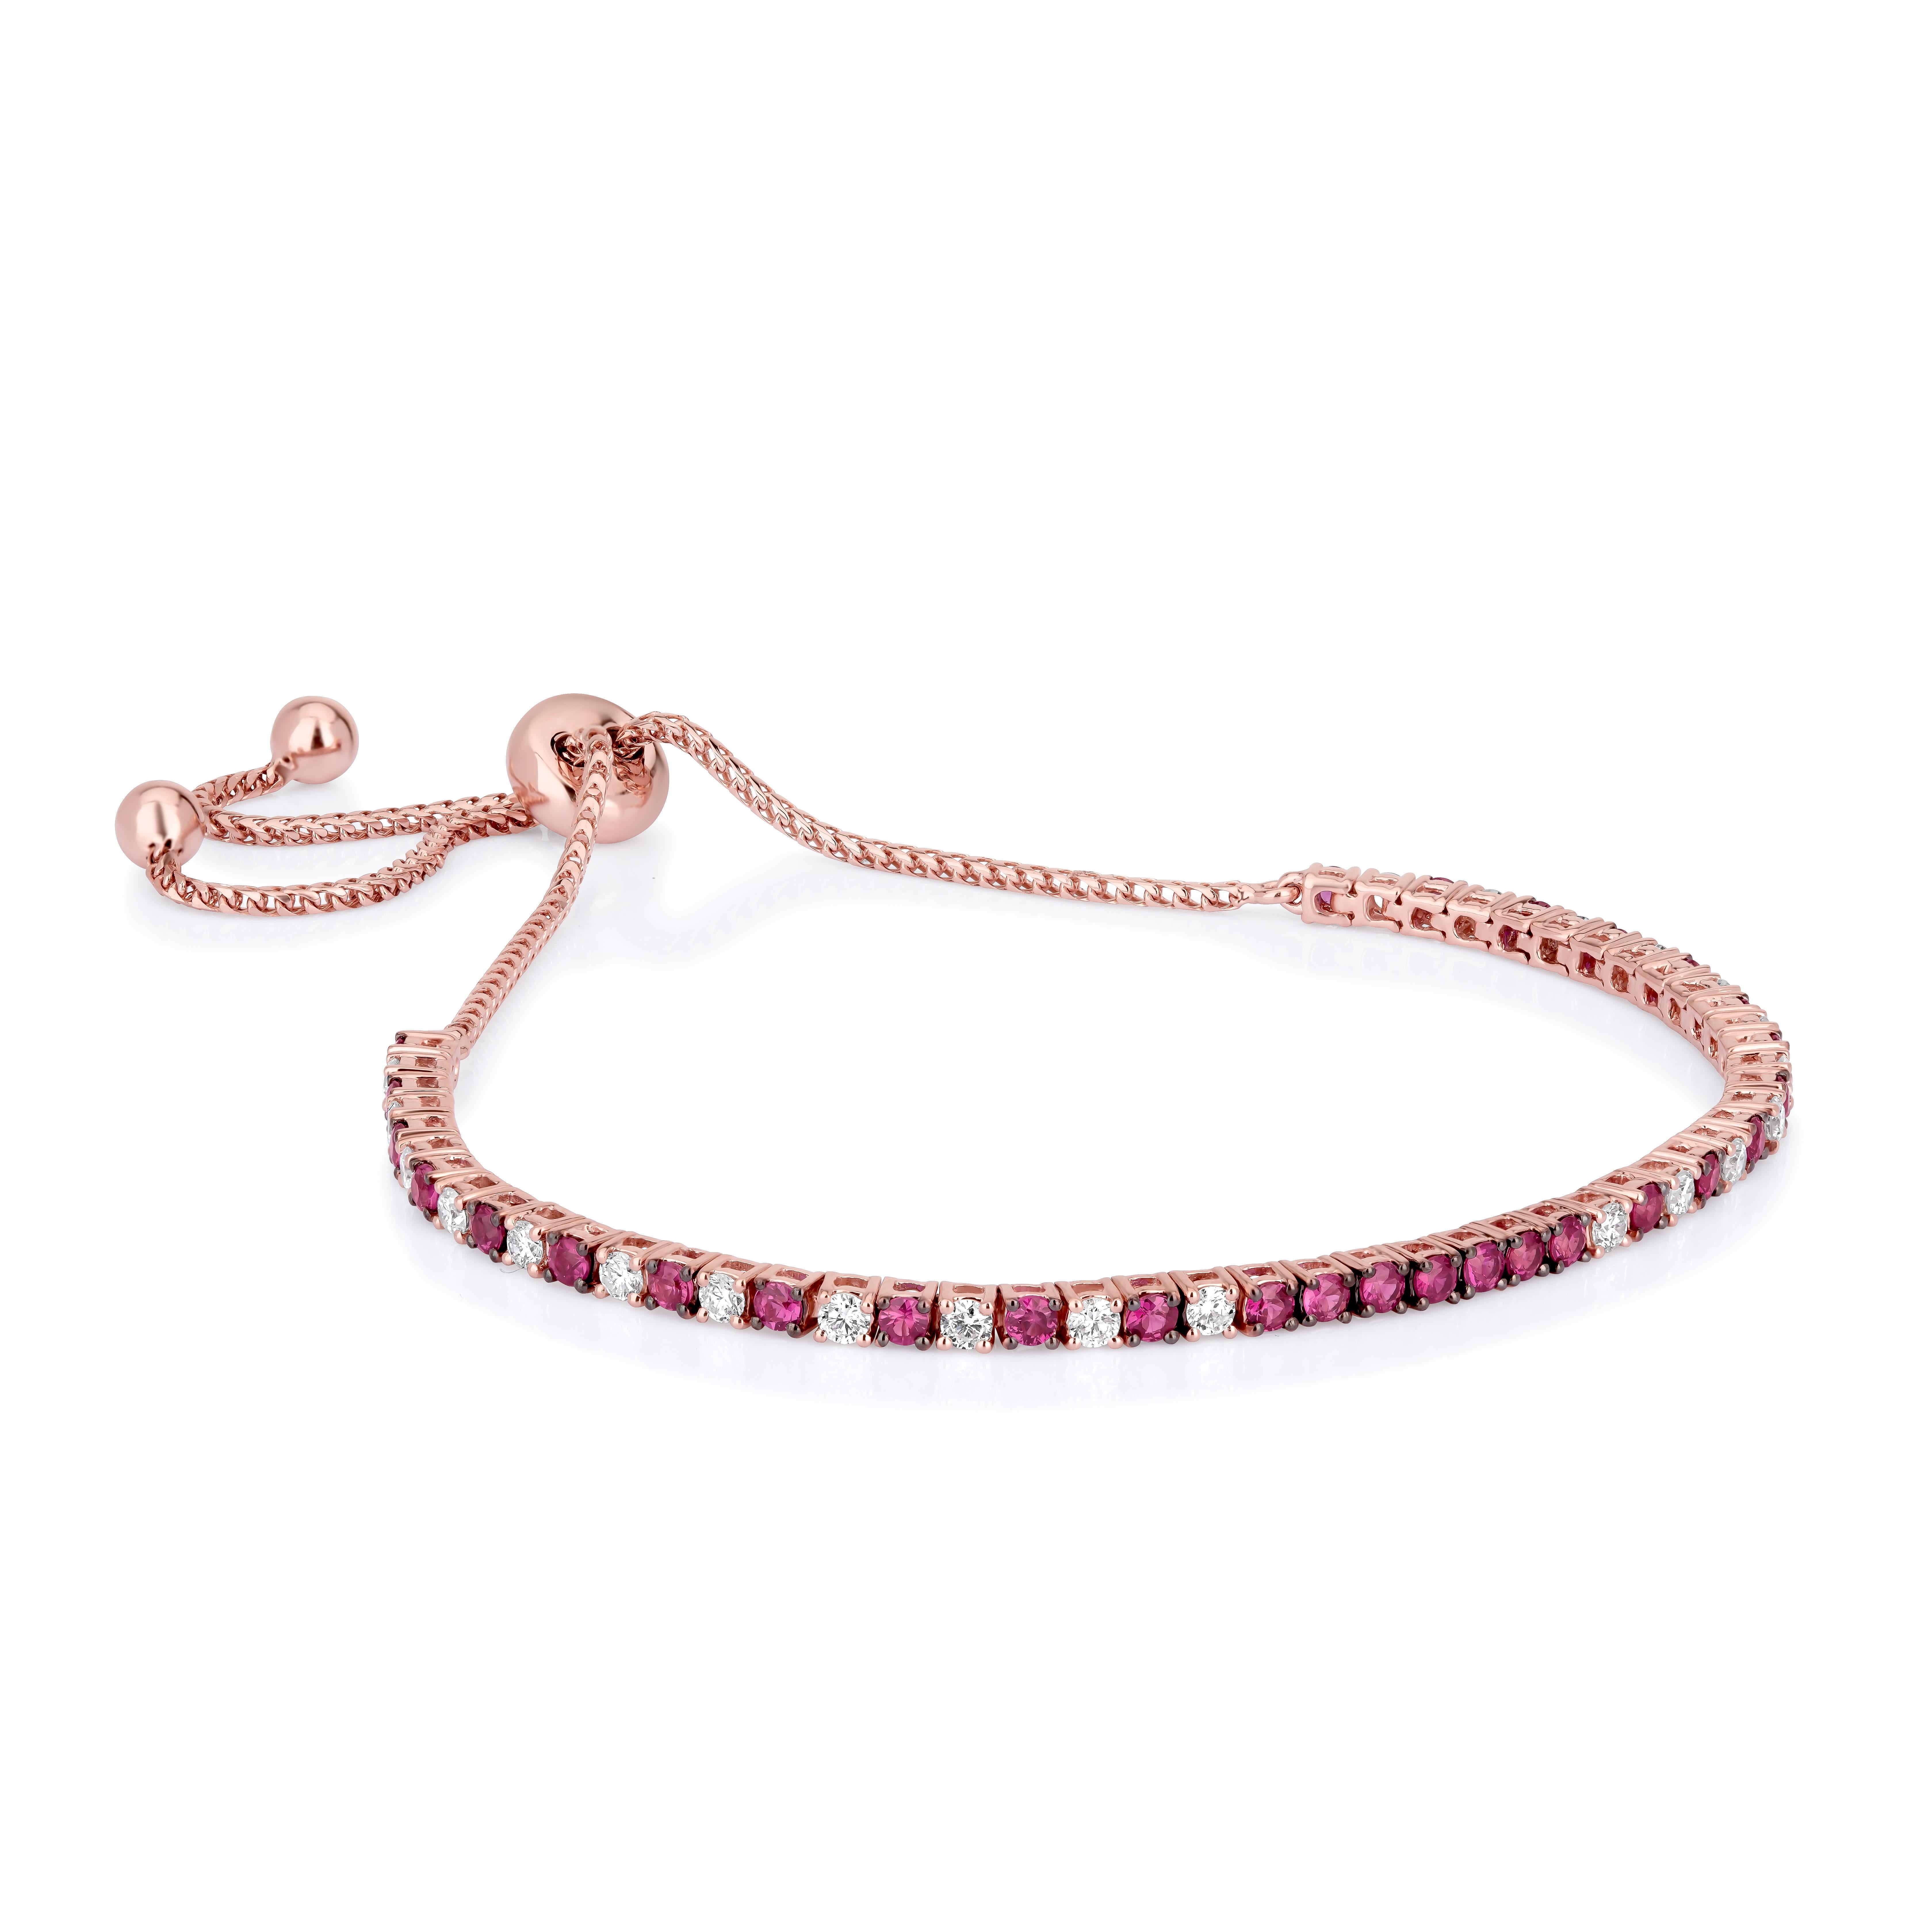 This lovely bracelet made of 18k Rose Gold. Round brilliant-cut diamonds are put in prong settings on this Gemistry bracelet along with round ruby stones. The 0.64 Ct. of diamonds have an I1 clarity and are GH in color. Beautiful rose gold bracelet